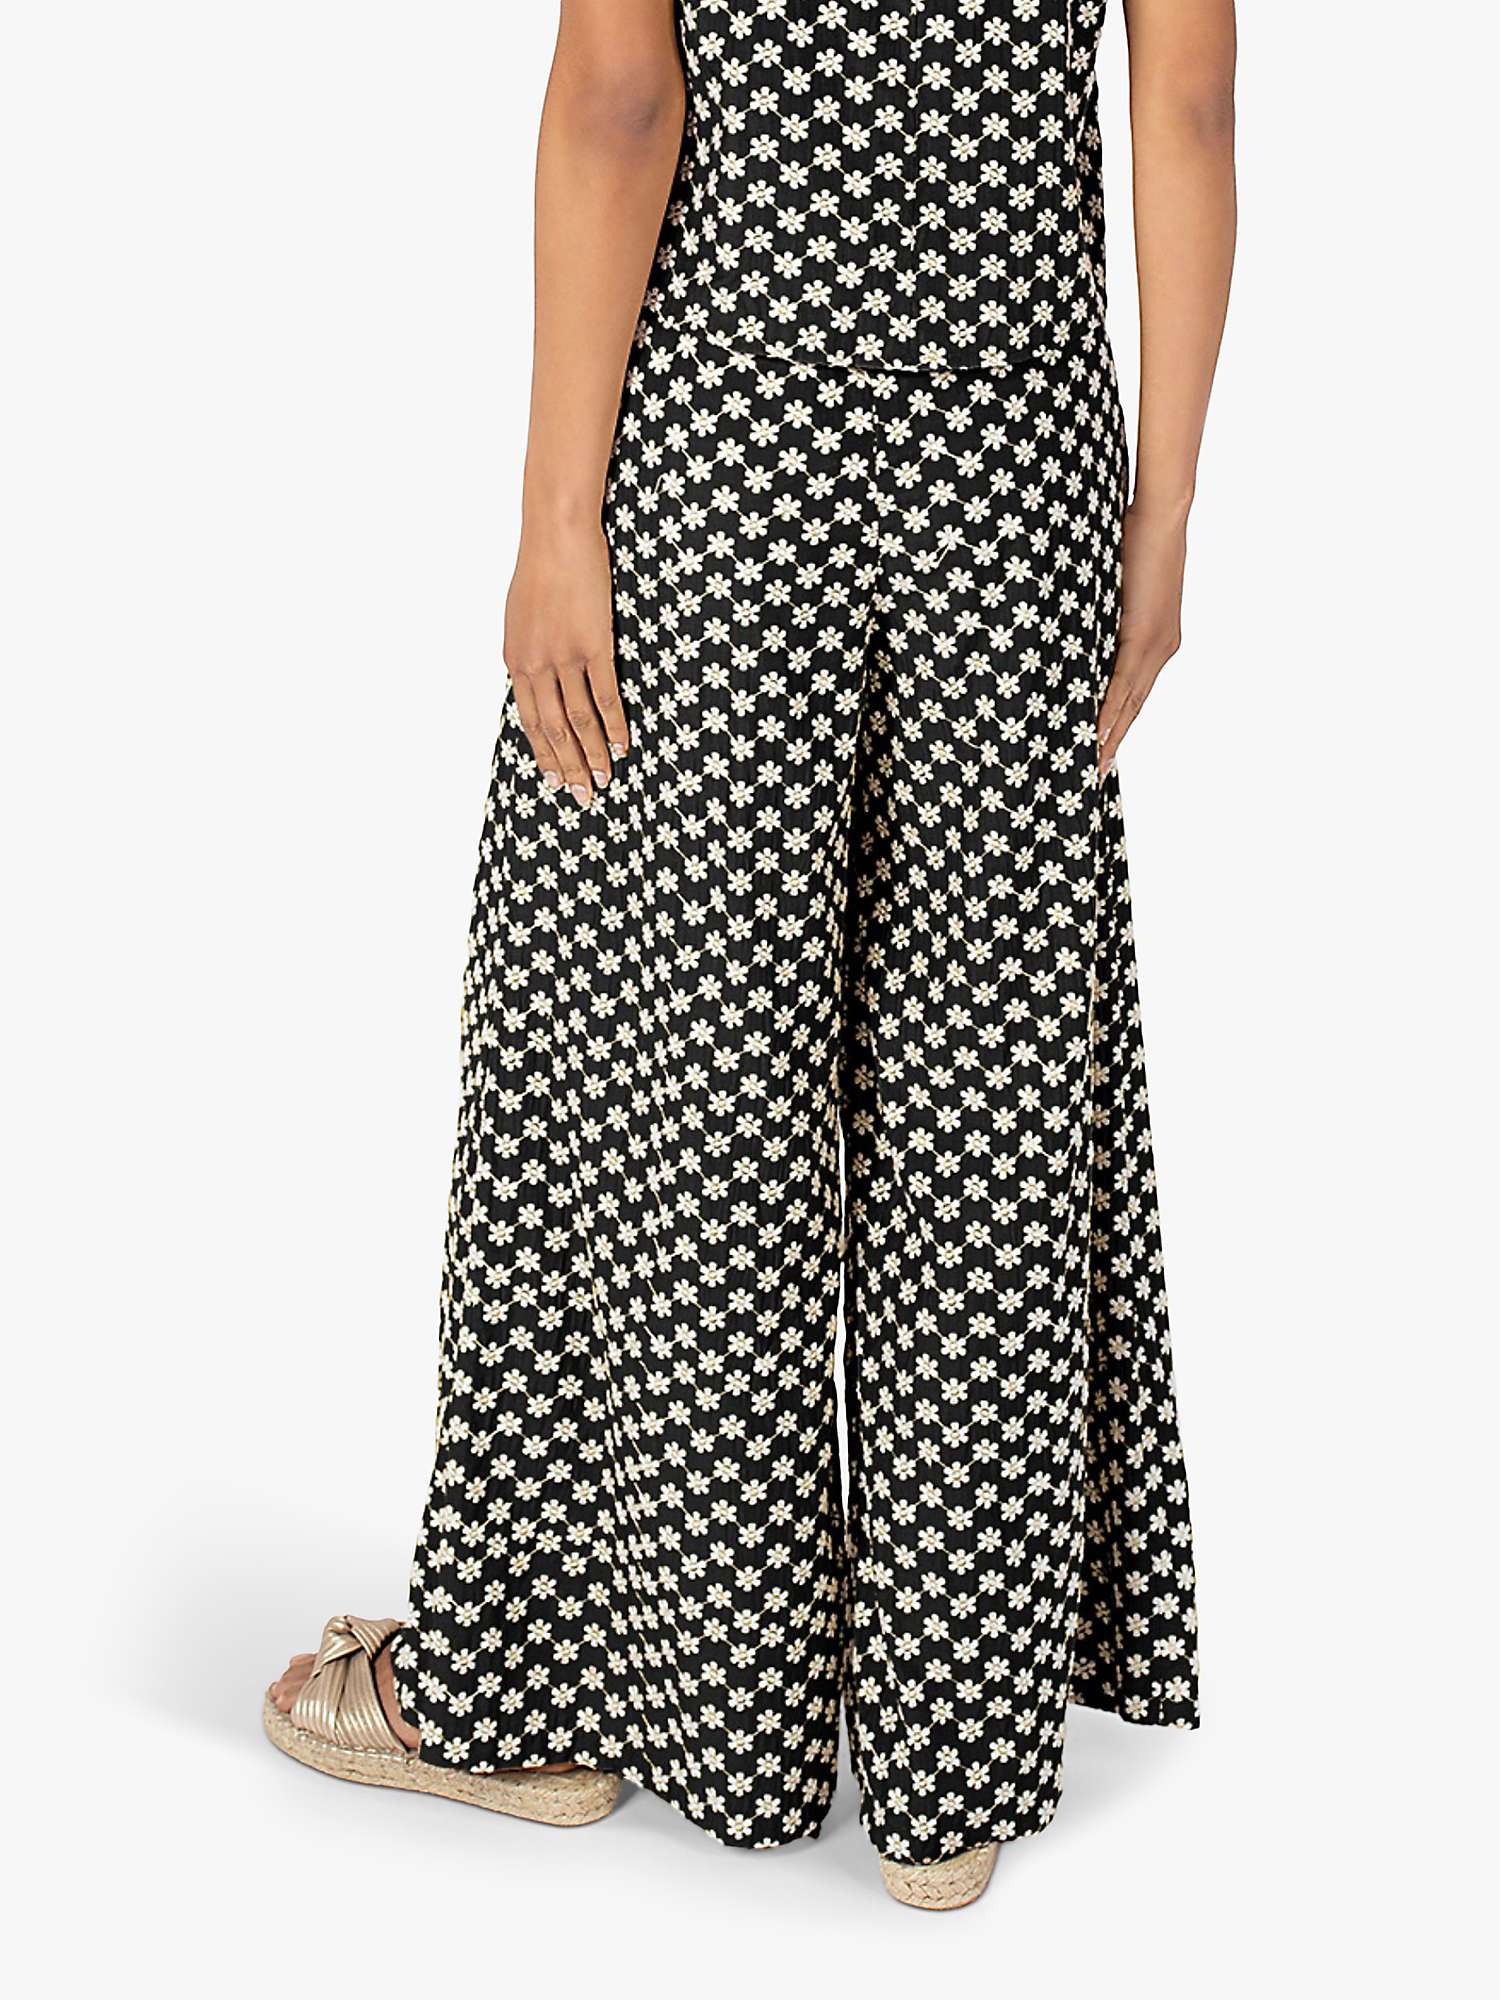 Buy Traffic People The Chorus Evie Ditsy Floral Print Wide Leg Trousers Online at johnlewis.com